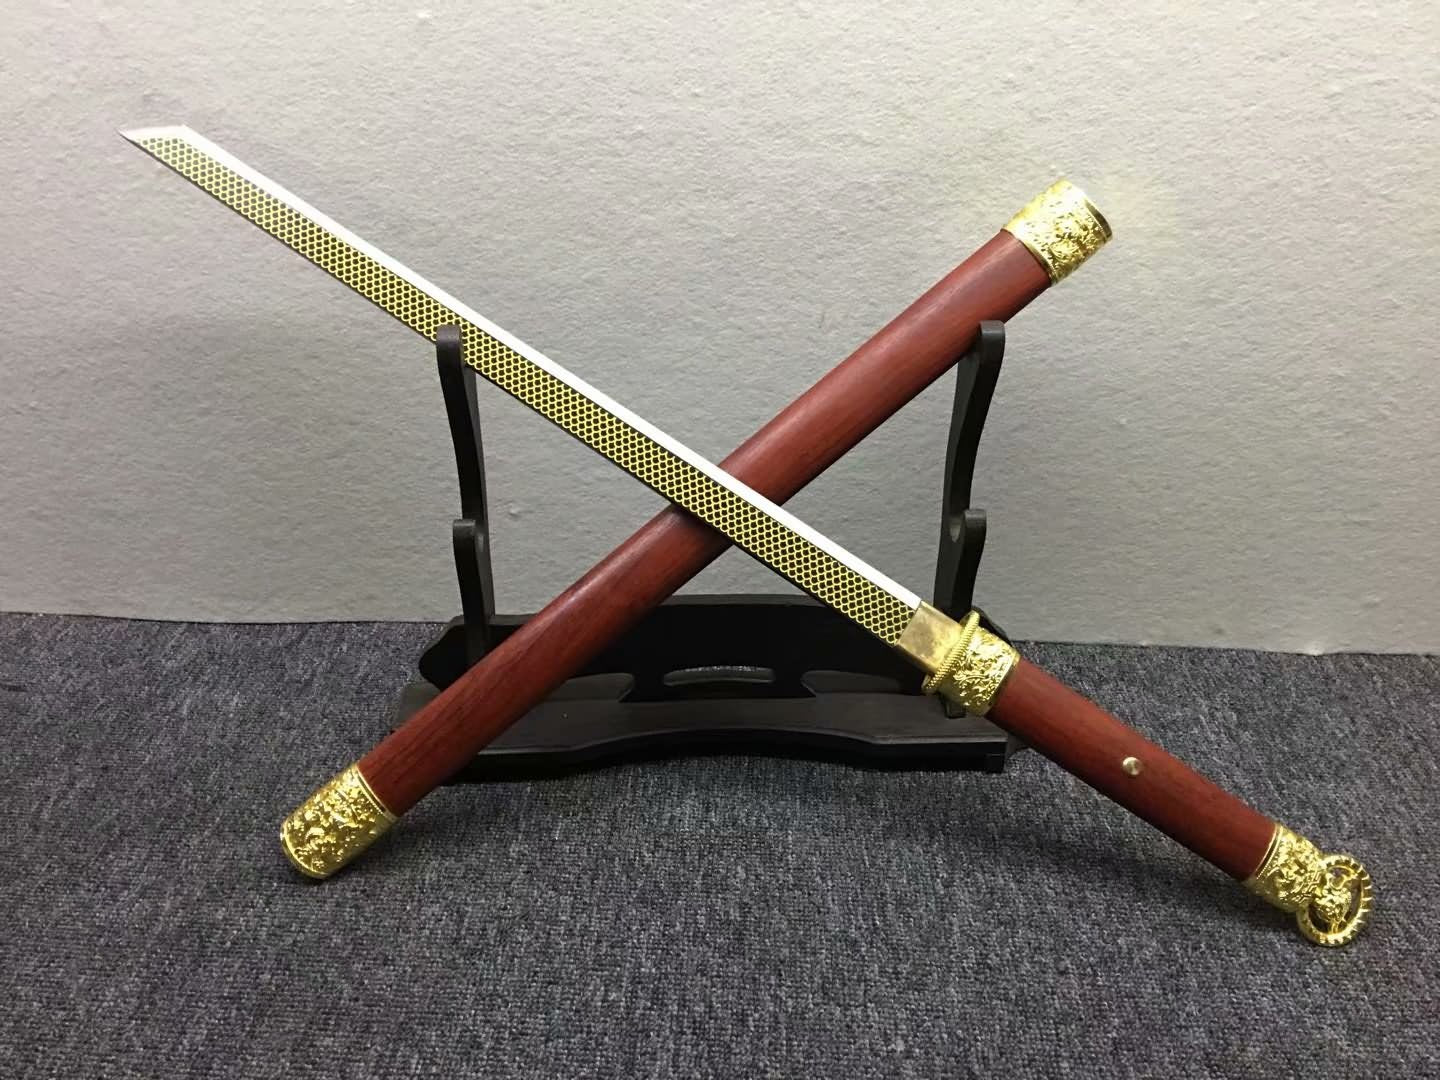 Tang dao,Sword,High carbon steel etch blade,Redwood,Alloy - Chinese sword shop